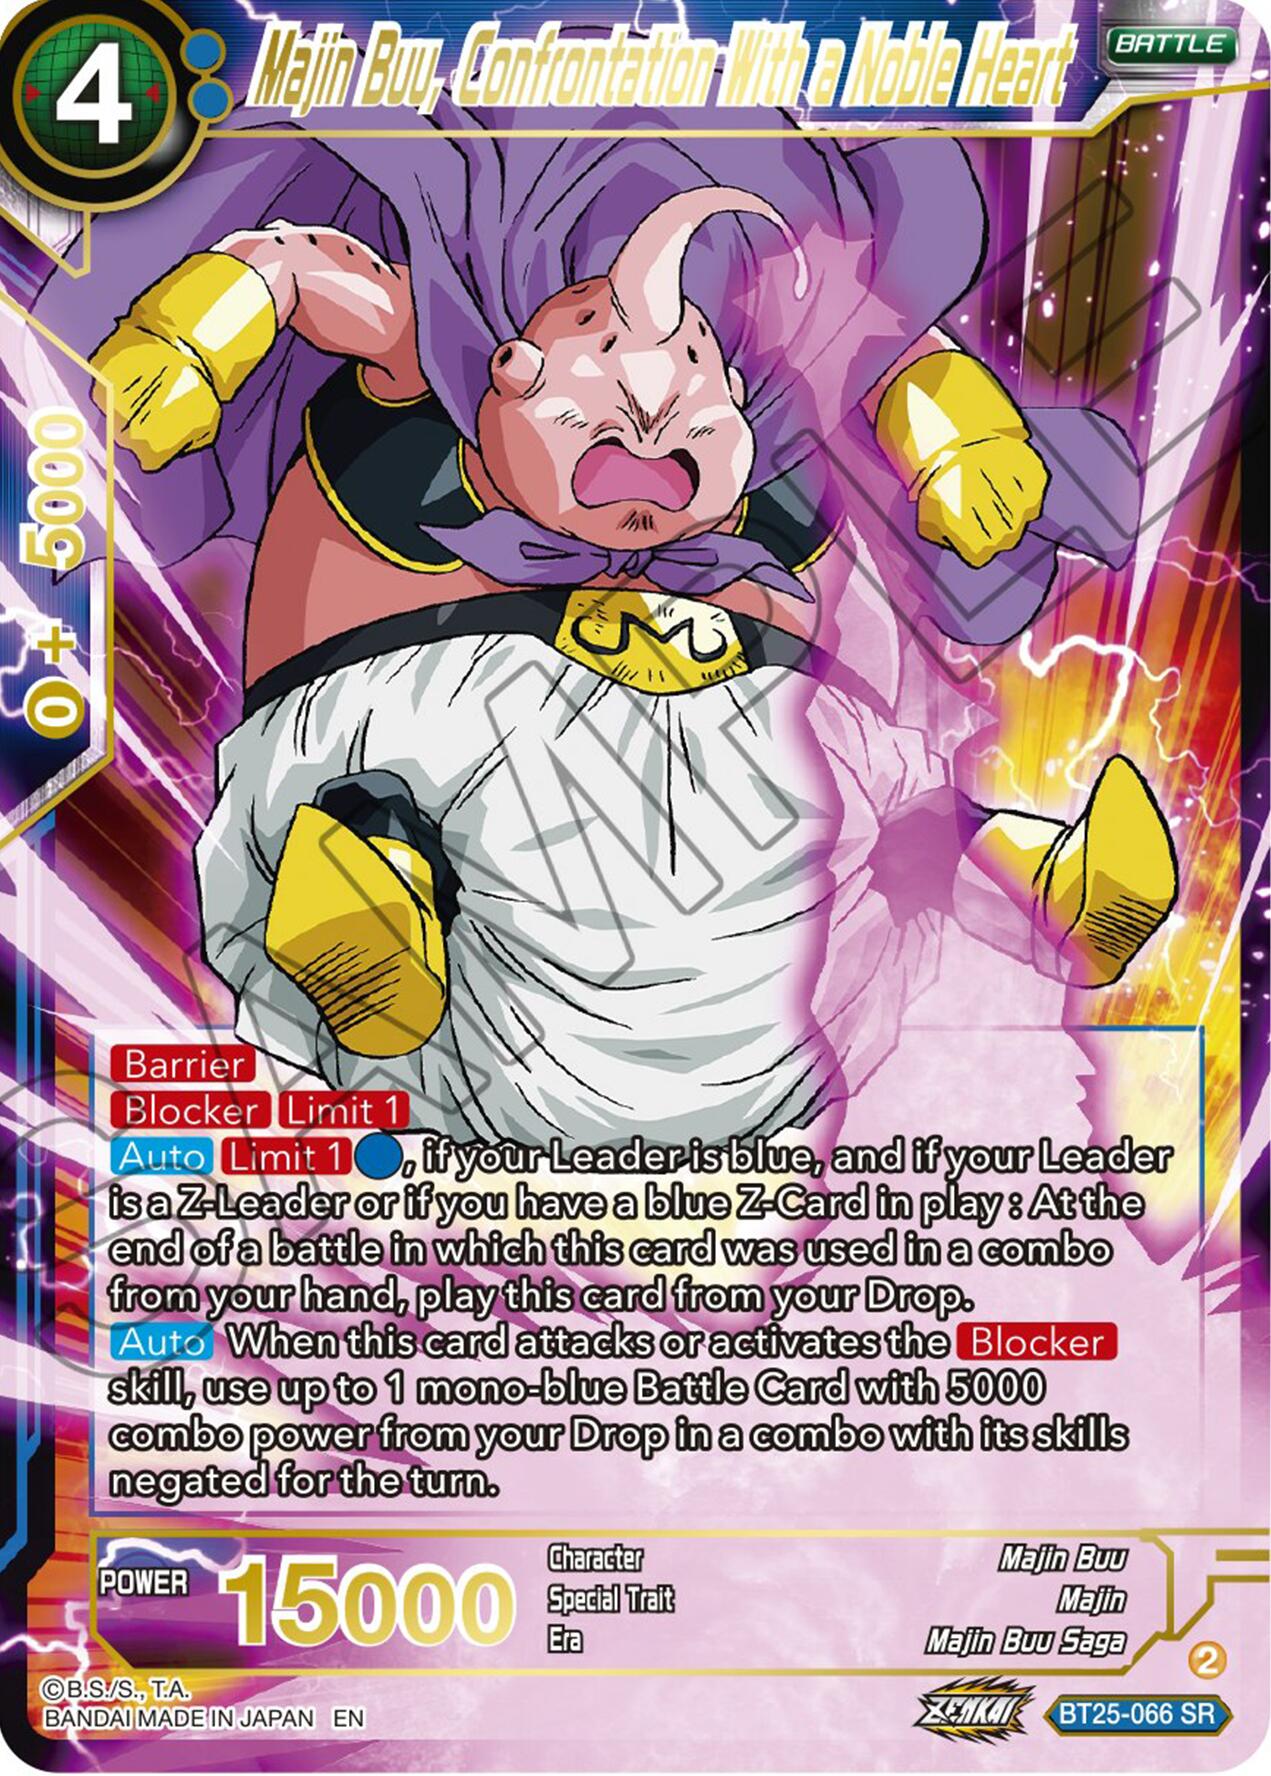 Majin Buu, Confrontaliter With a Mobile Heat (BT25-066) [Legend of the Dragon Balls] | Pegasus Games WI